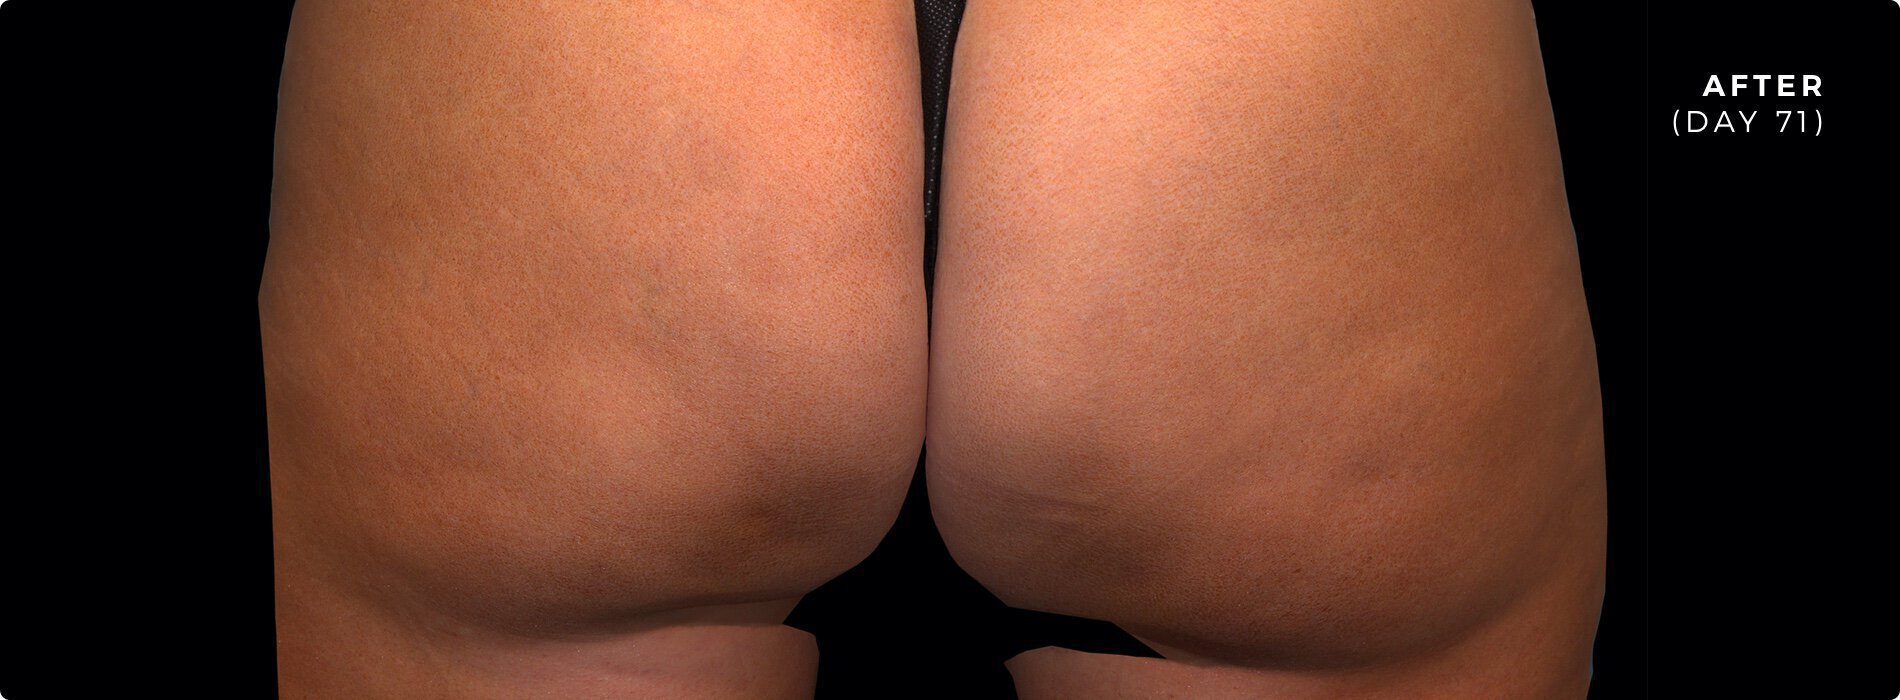 Cellulite after photo on Vero Beach patient